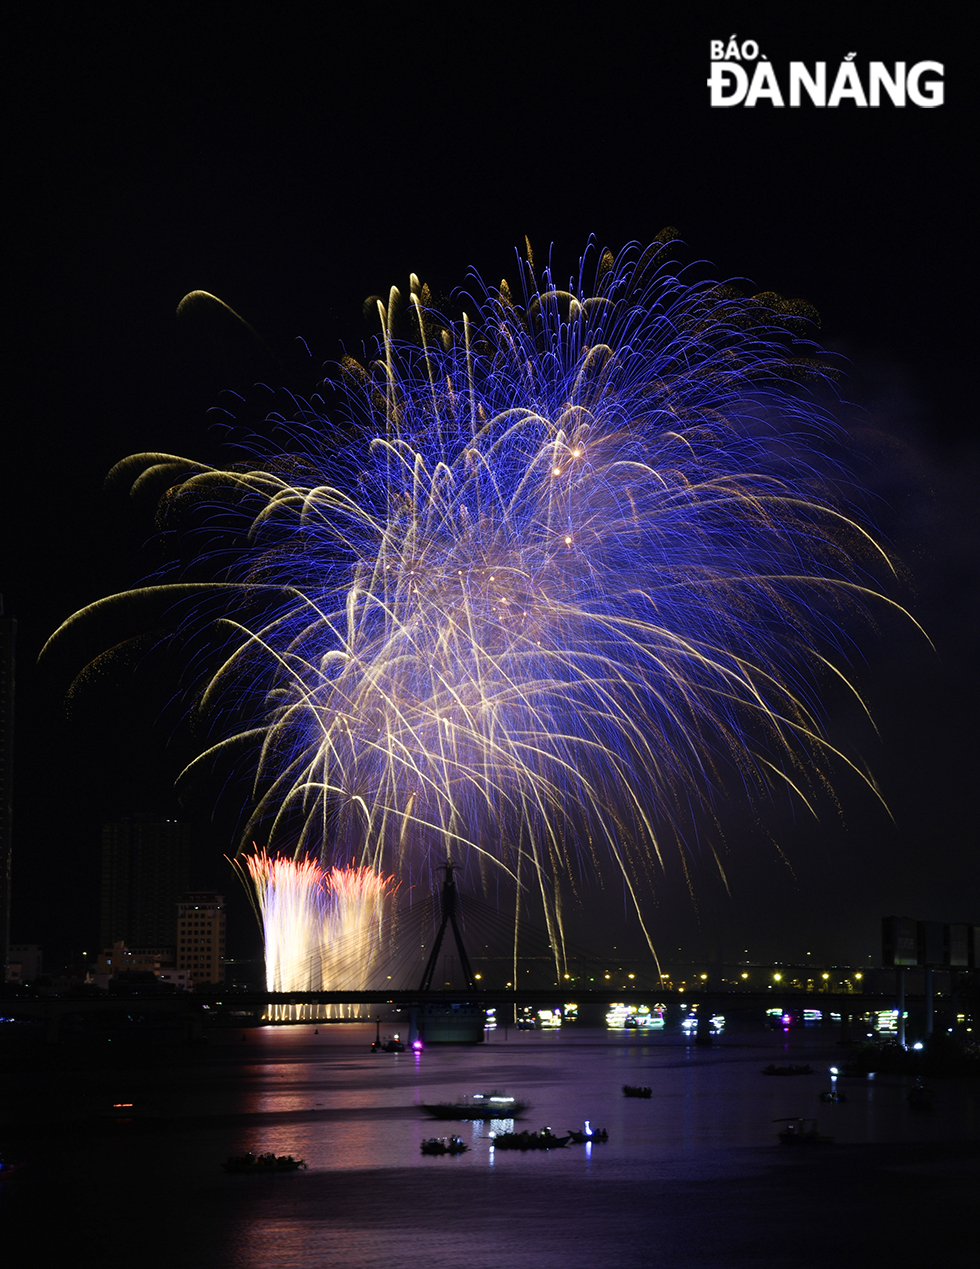 The Da Nang International Fireworks Festival 2023 returns from June 2 - July 8 after a three-year hiatus due to COVID-19